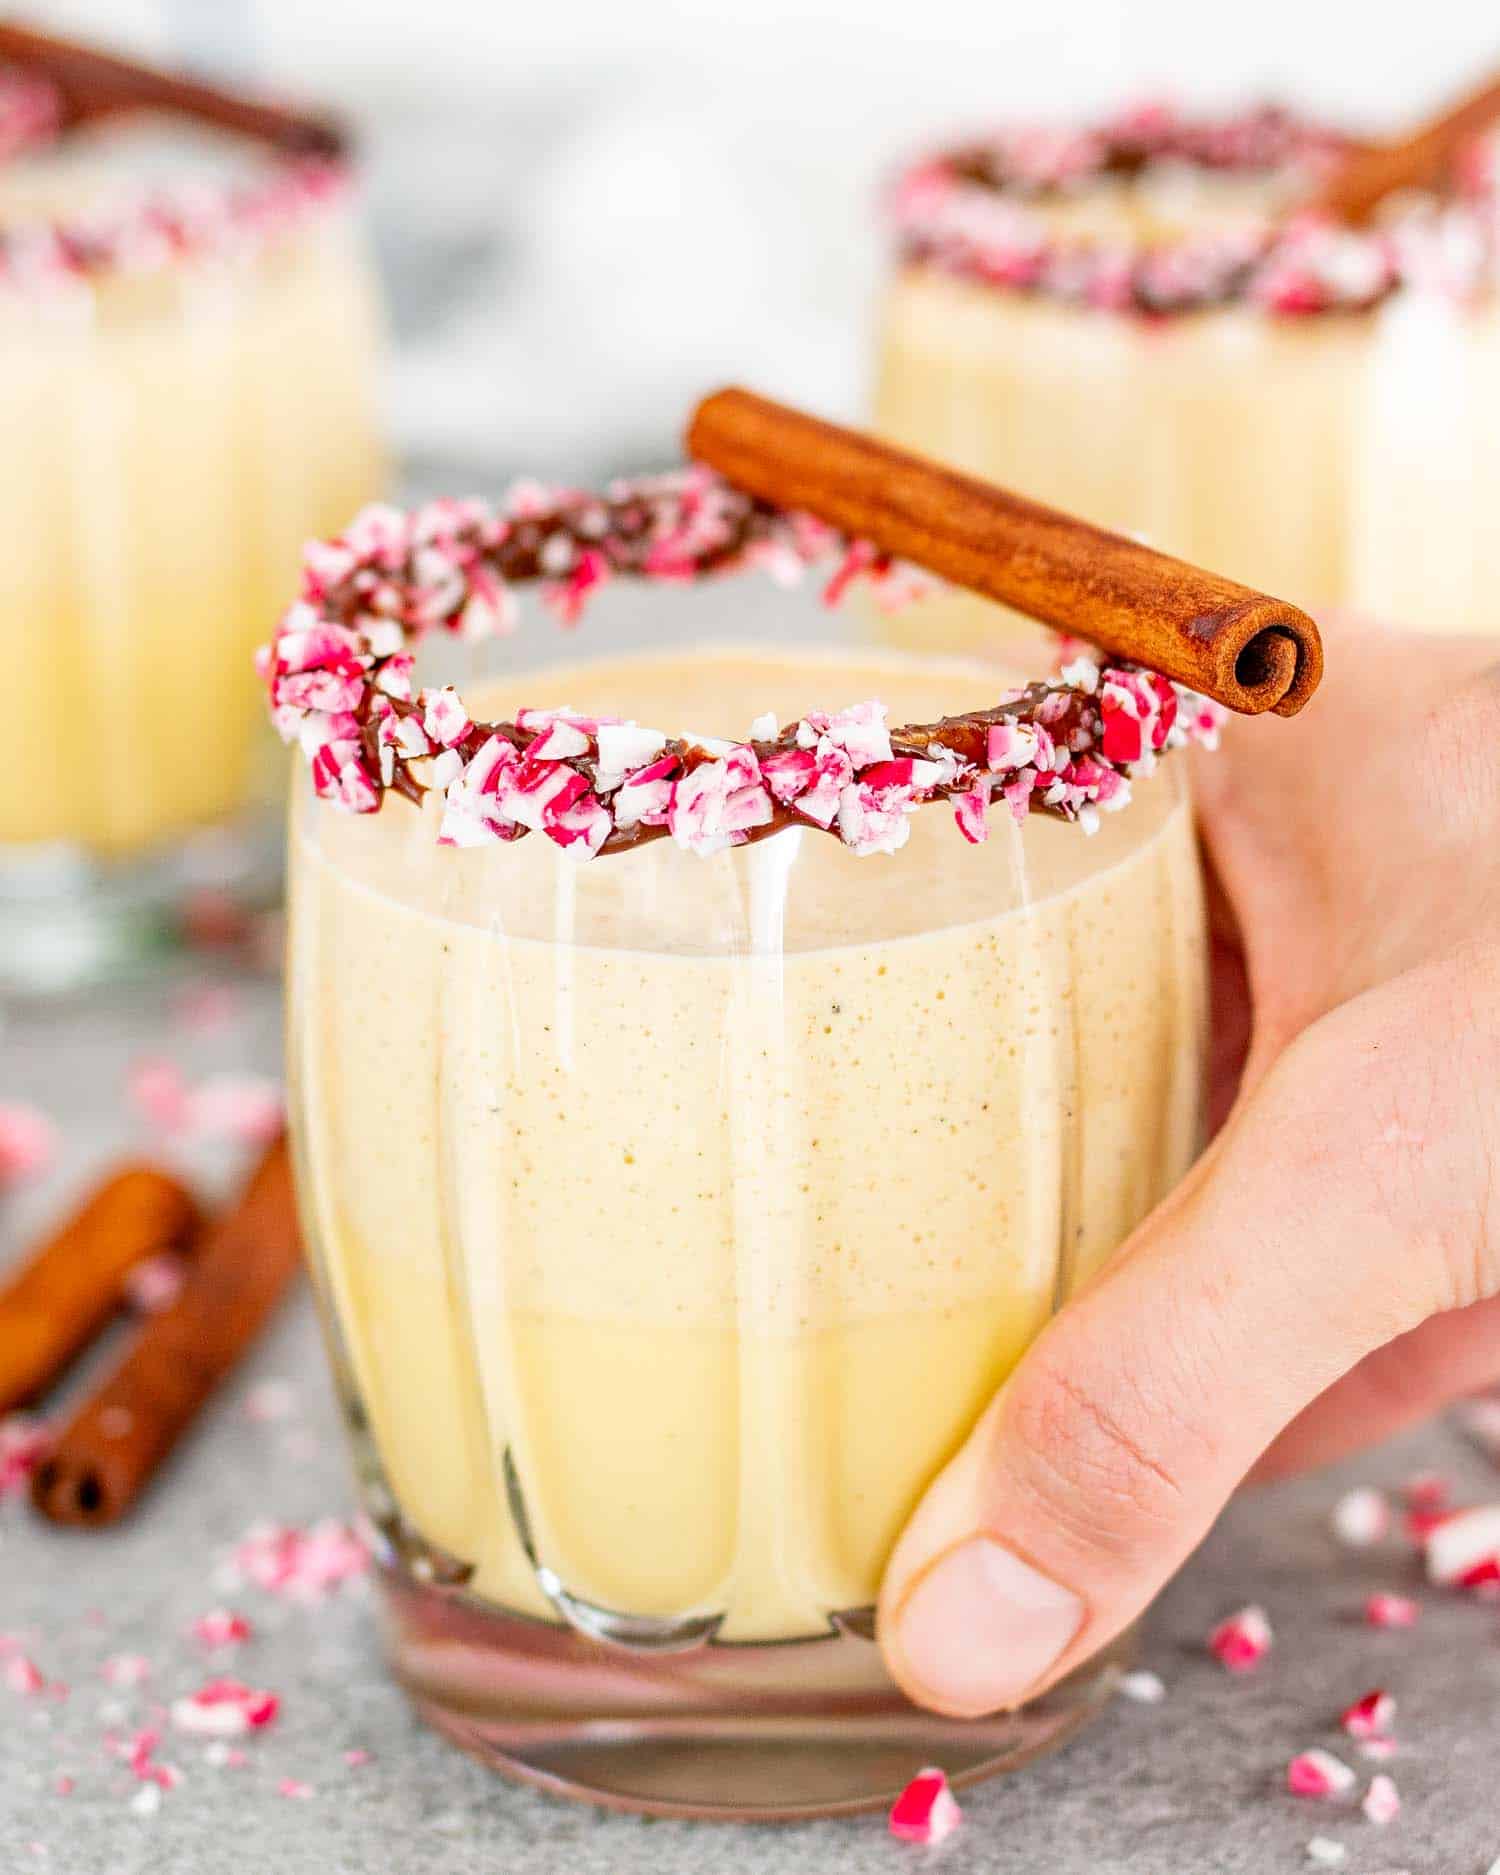 glasses of eggnog in glasses rimmed with chocolate and crushed candy cane pieces, garnished with cinnamon sticks.